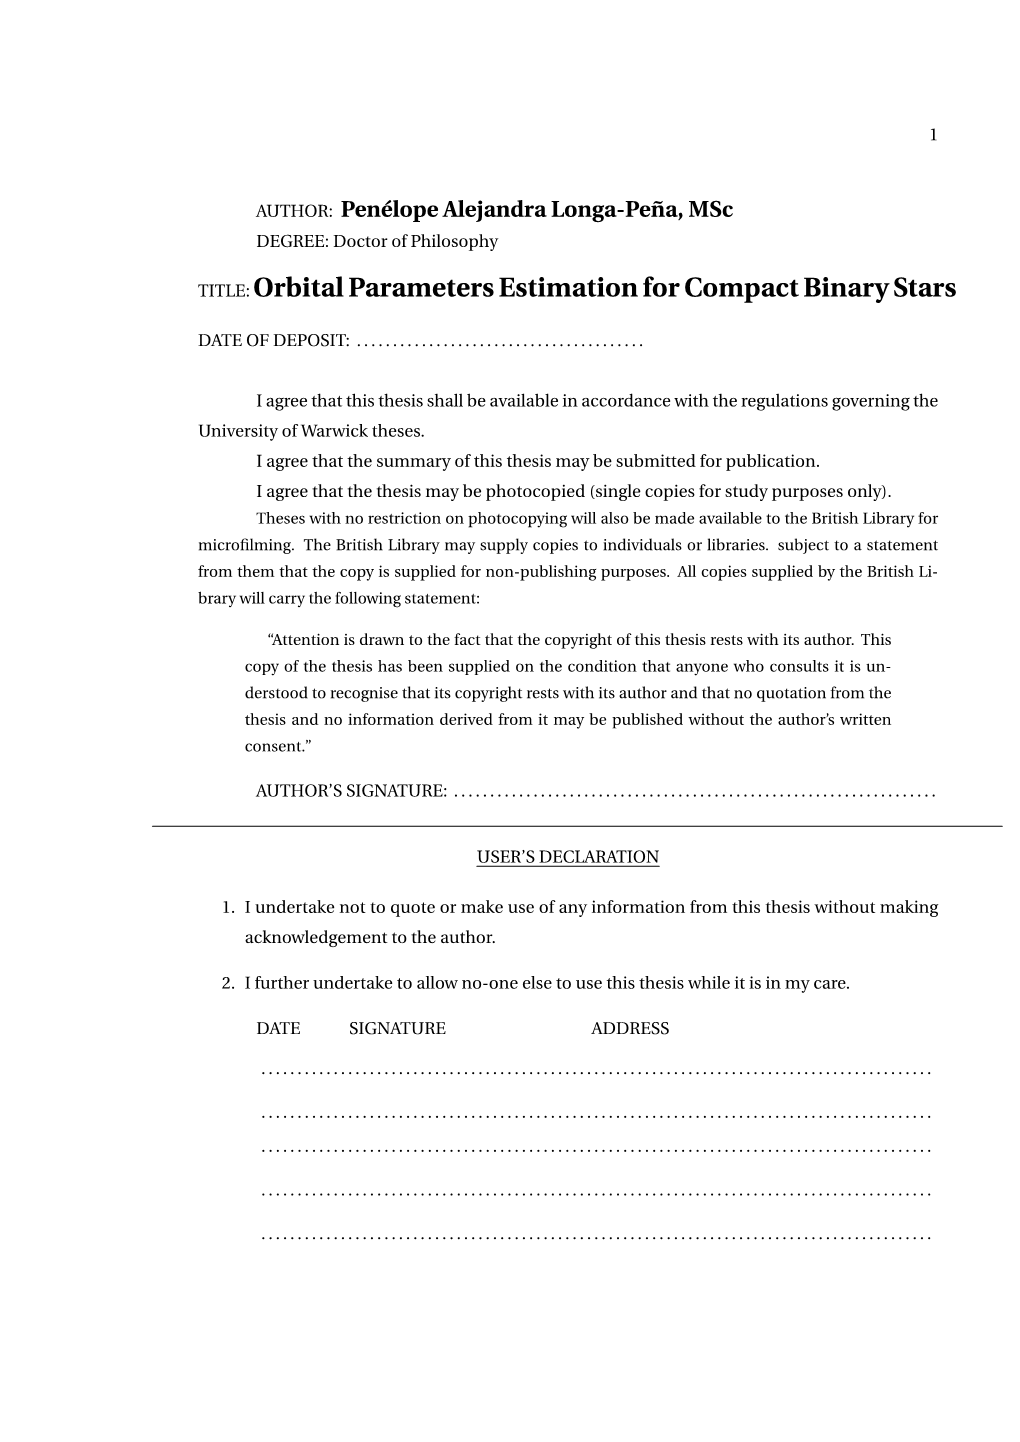 TITLE:Orbital Parameters Estimation for Compact Binary Stars